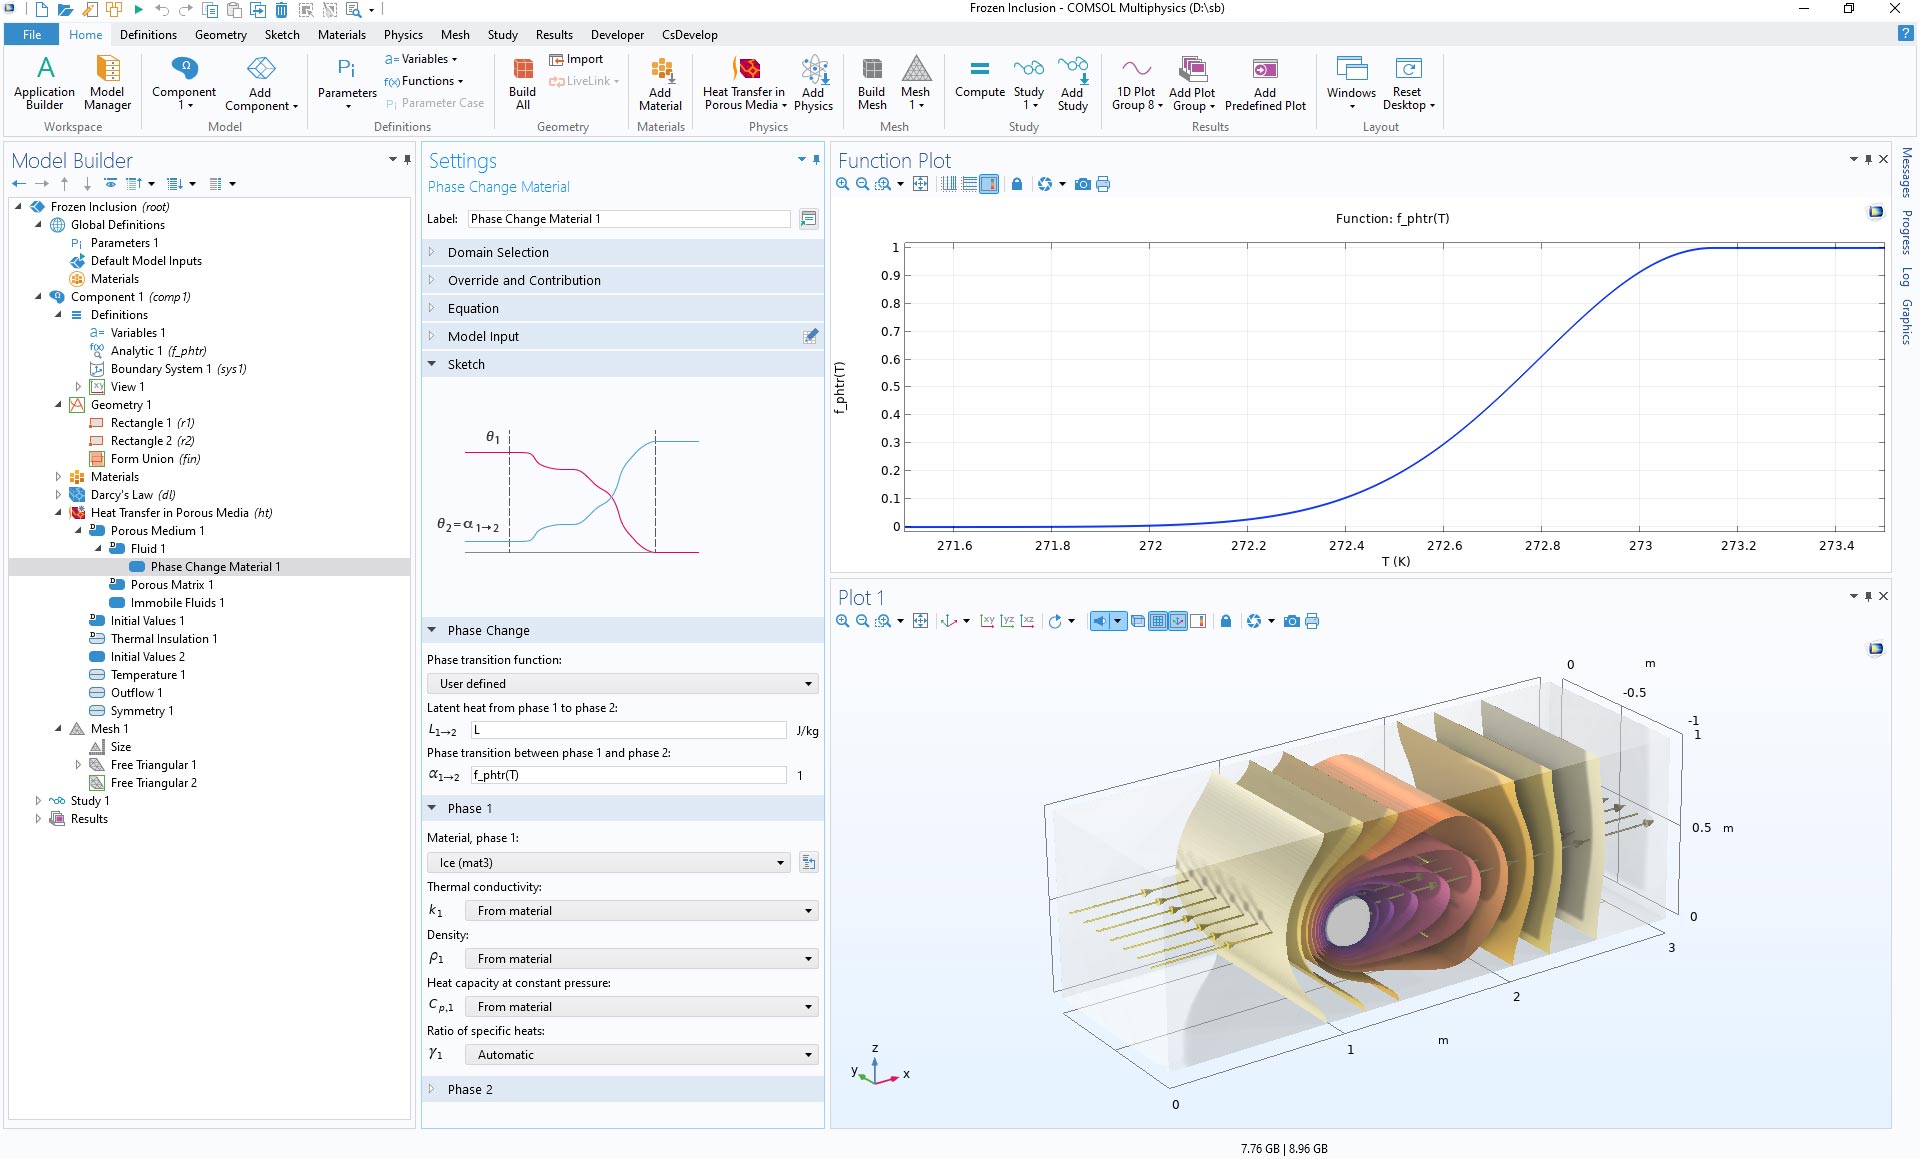 The COMSOL Multiphysics UI showing the Model Builder window with the Phase Change Material subnode selected, the corresponding settings, a Function Plot window, and a Plot 1 window showing the Frozen Inclusion model.